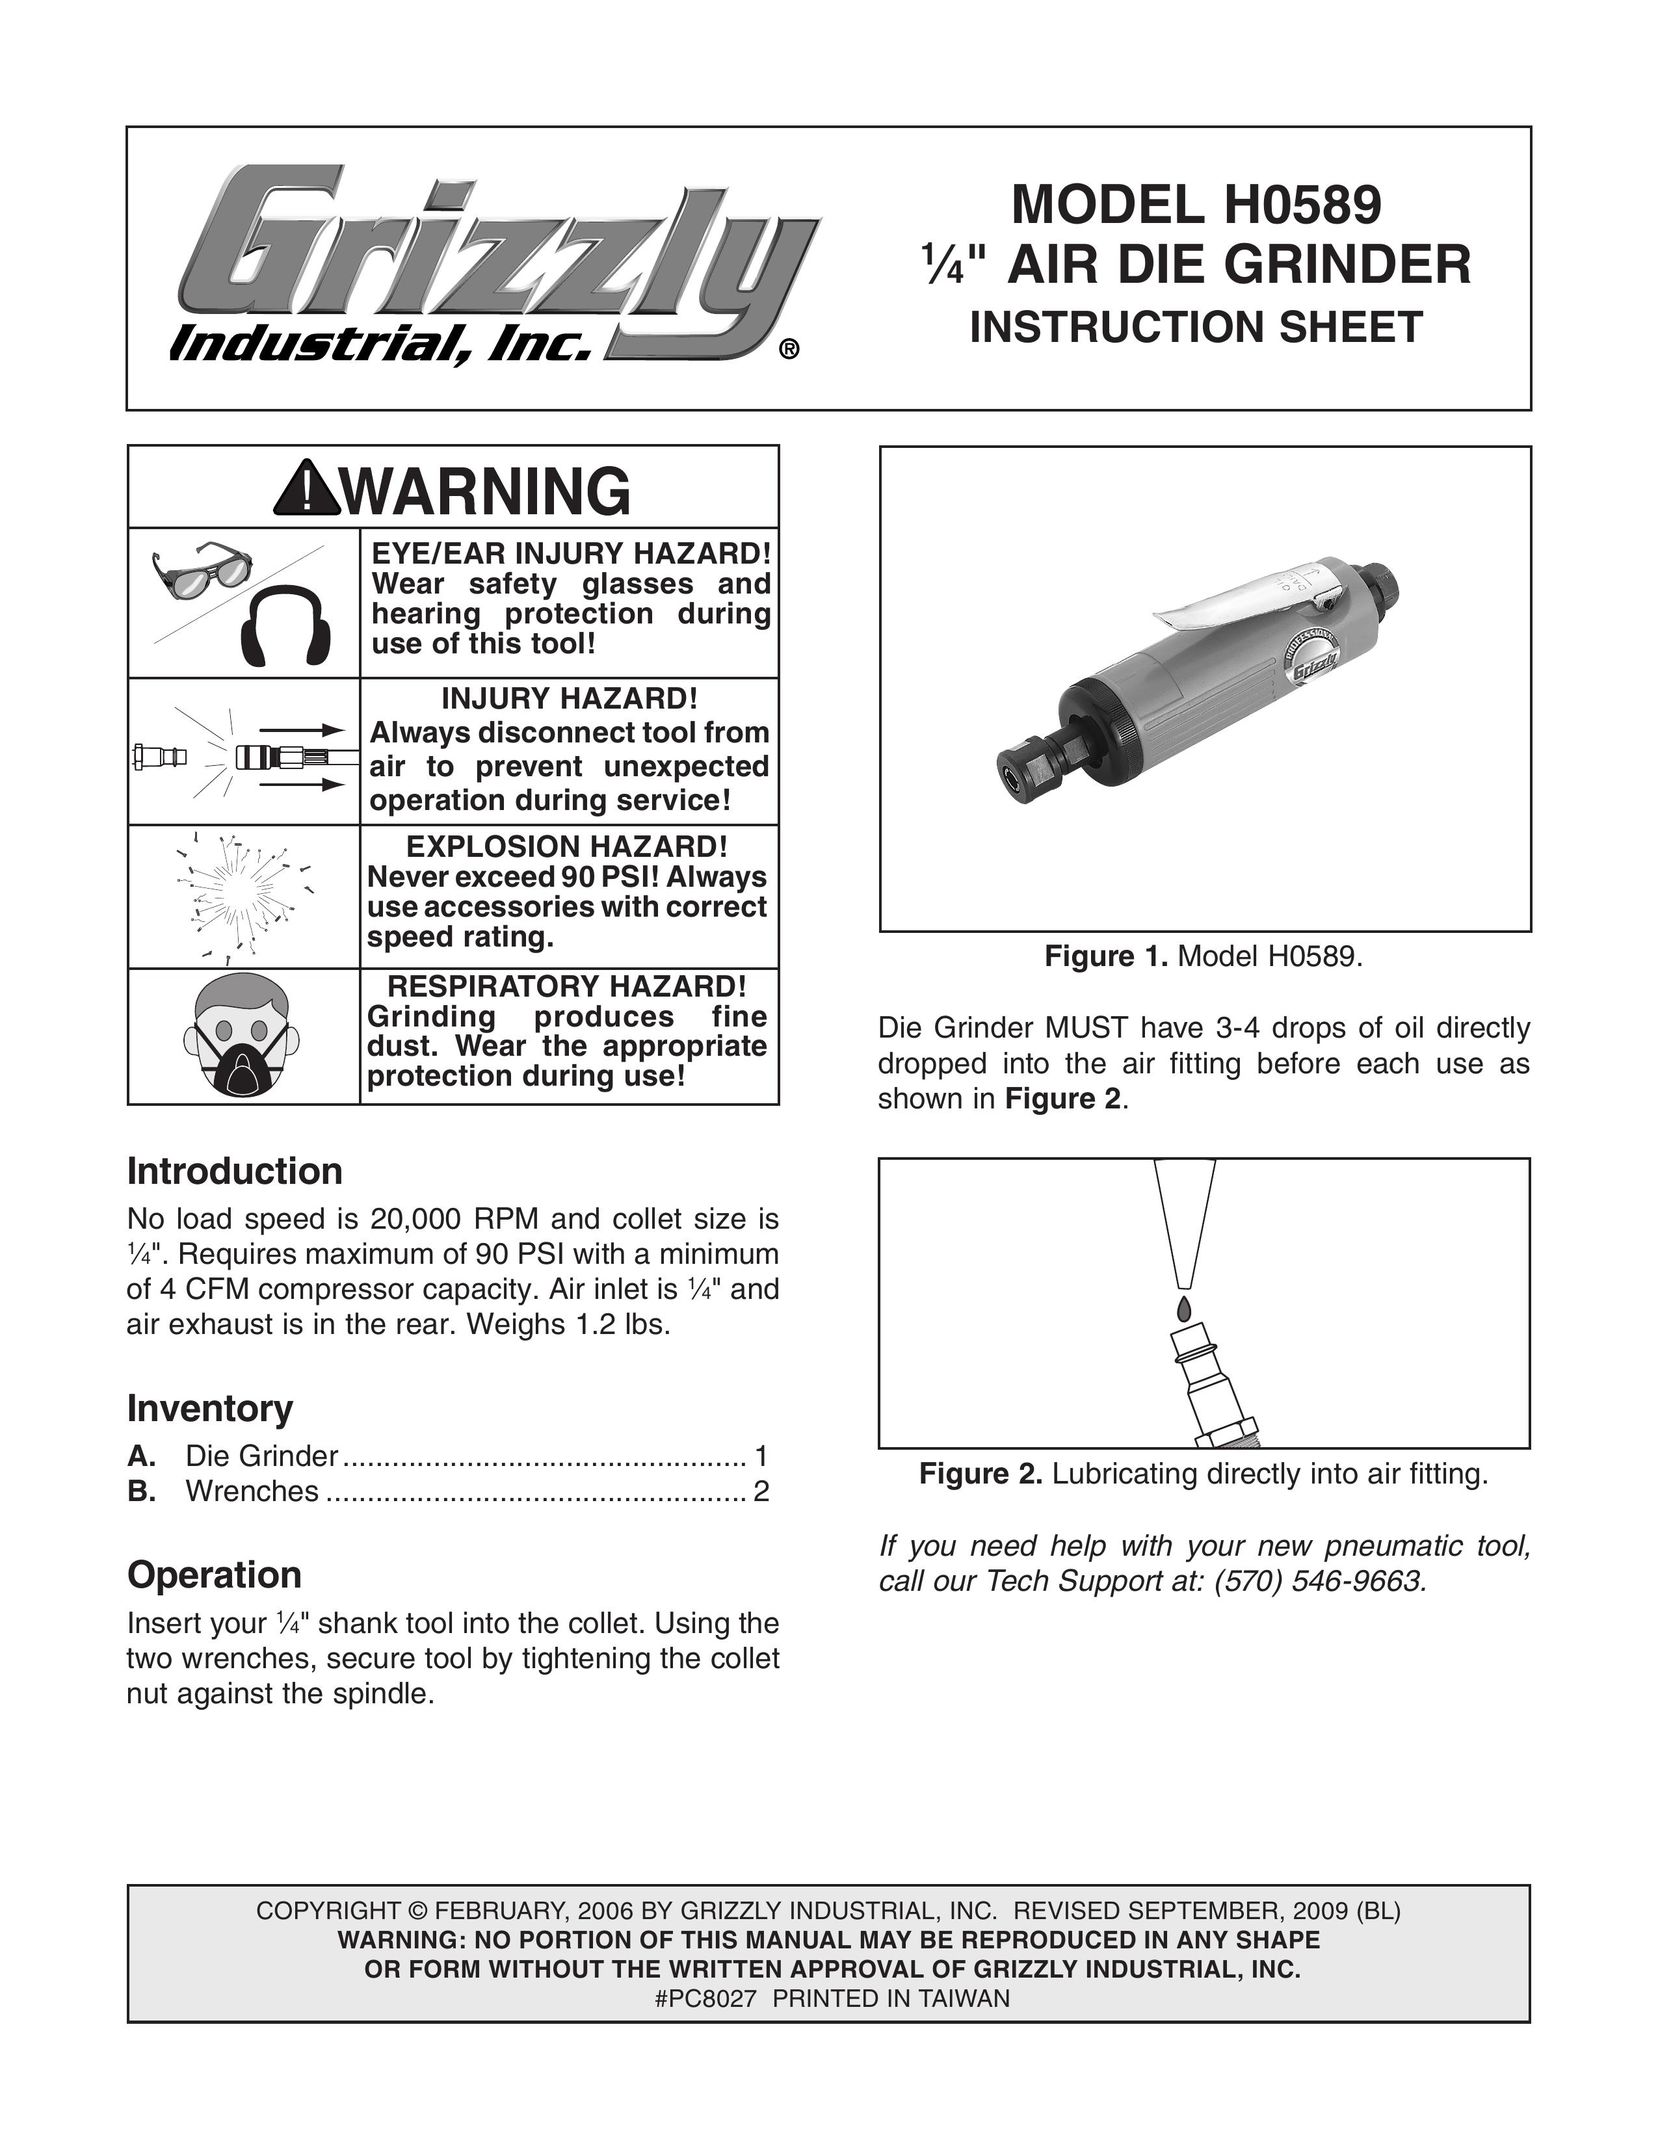 Grizzly H0589 Grinder User Manual